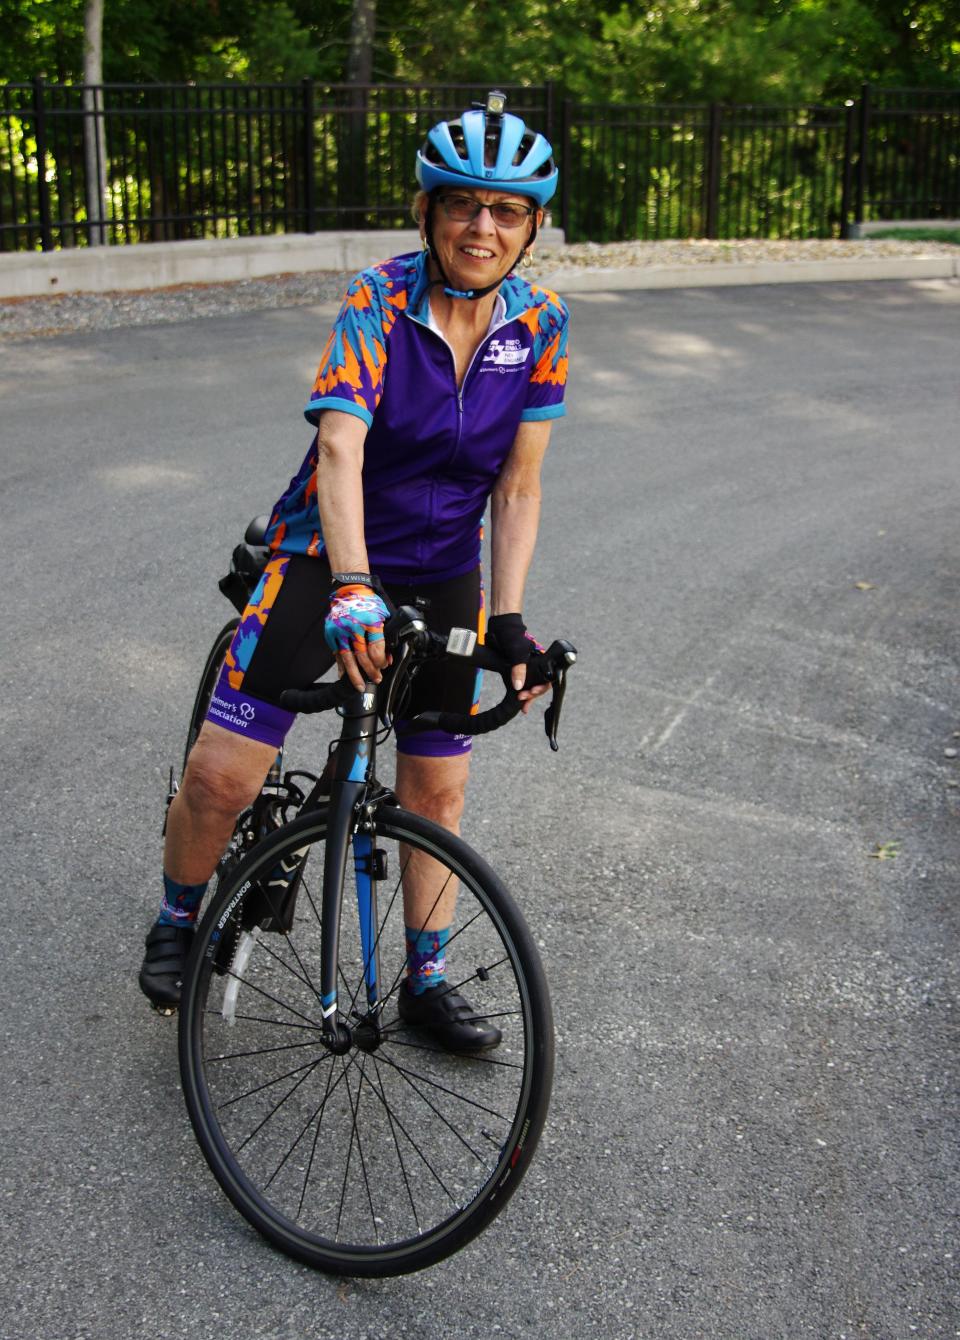 Ann Whaley-Tobin, of Easton, takes a pause in an afternoon workout with bike riding on Wednesday, July 13, 2022. Whaley-Tobin rides regularly to raise funds for Alzheimer's research.